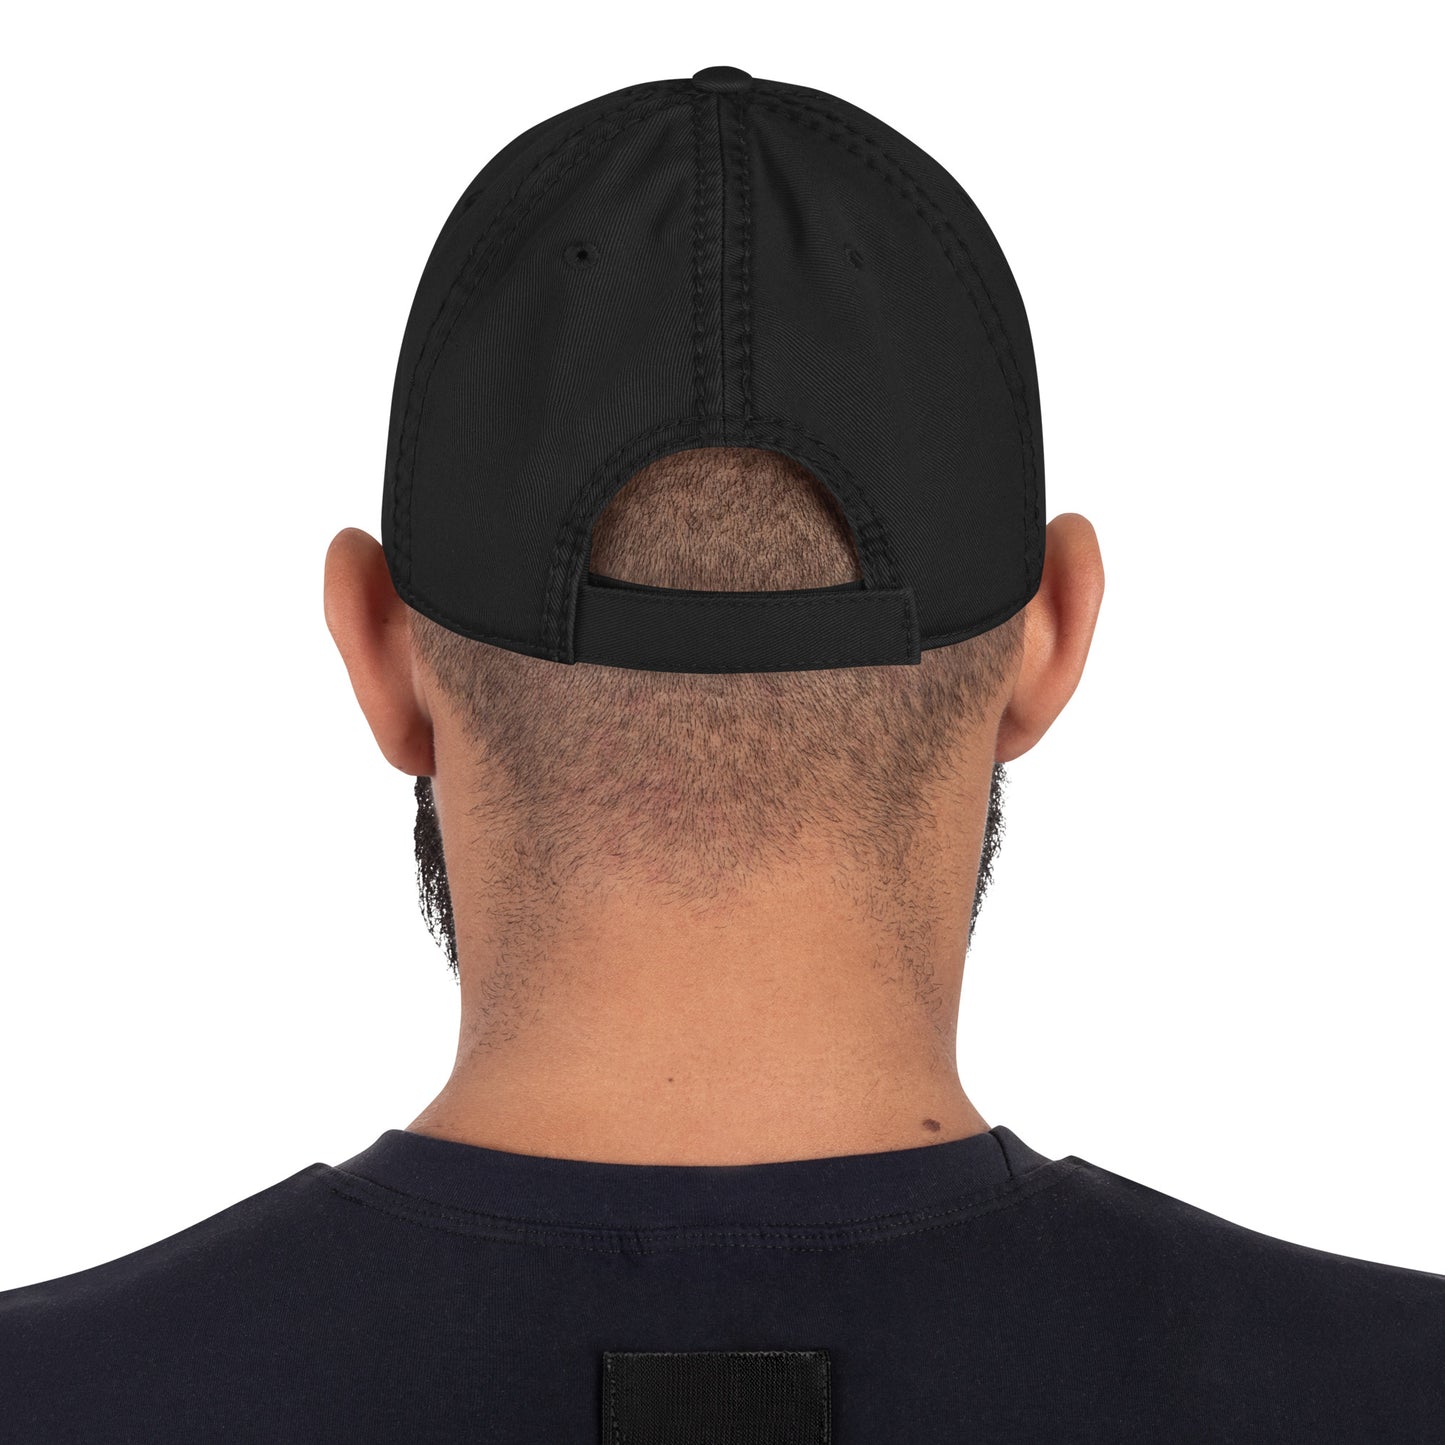 Fuck It Distressed Black Hat | BKLA | Shoes & Accessories | shoes, hats, phone covers, tote bags, clutch bags